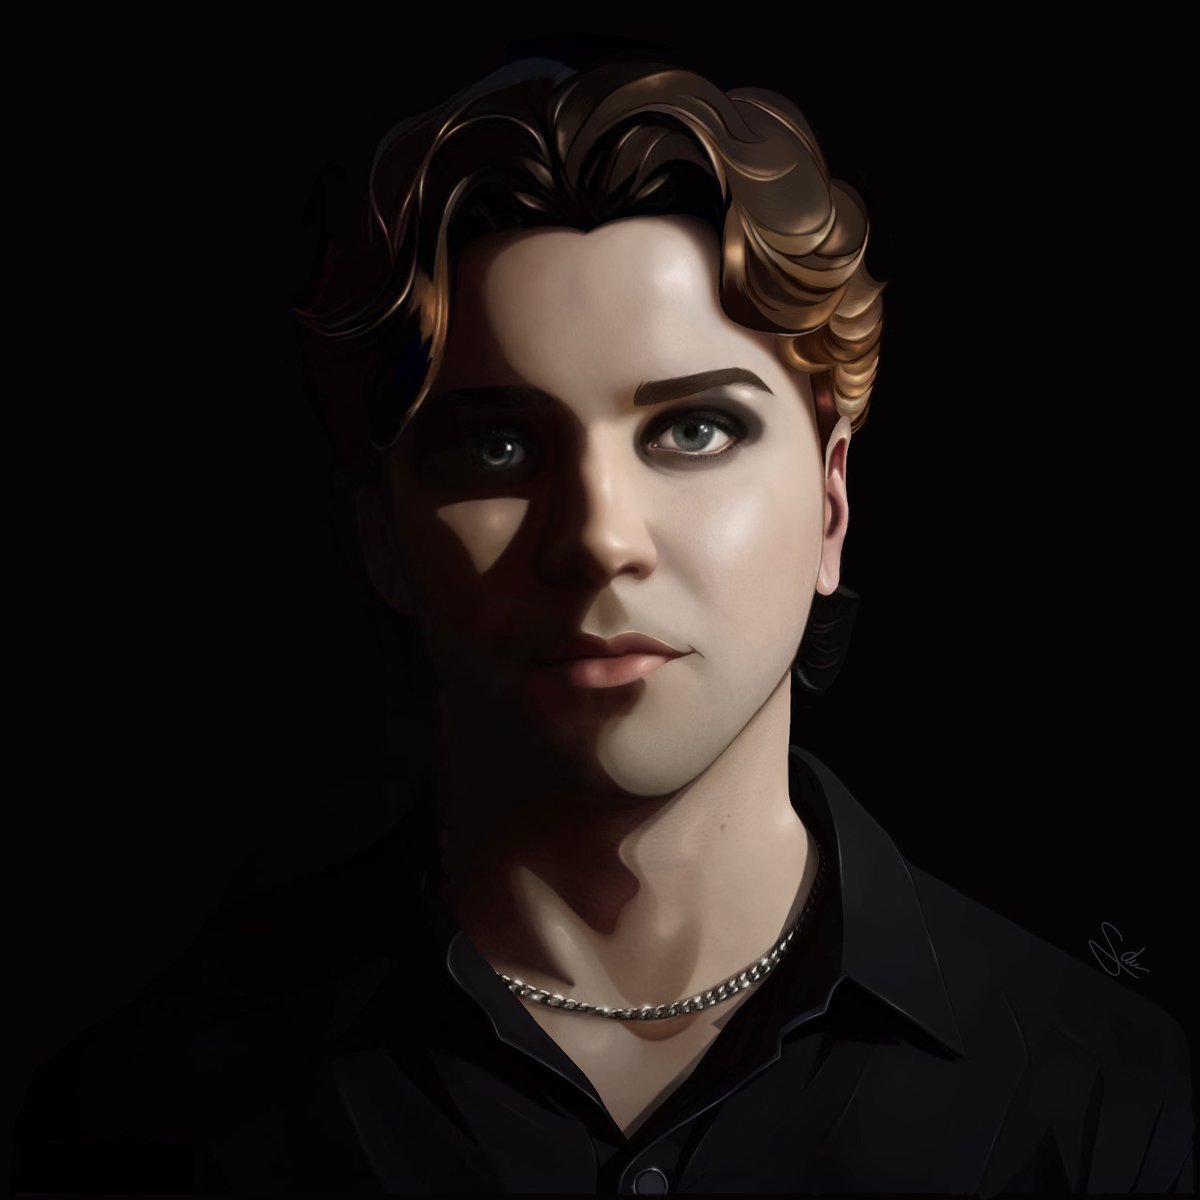 i never really posted my art on here but i actually draw. Here’s a painting of Olli Matela from @BlindChannelFIN that i just did. i usually draw with pencil on paper but this was the first time i did digital art. #blindchannel